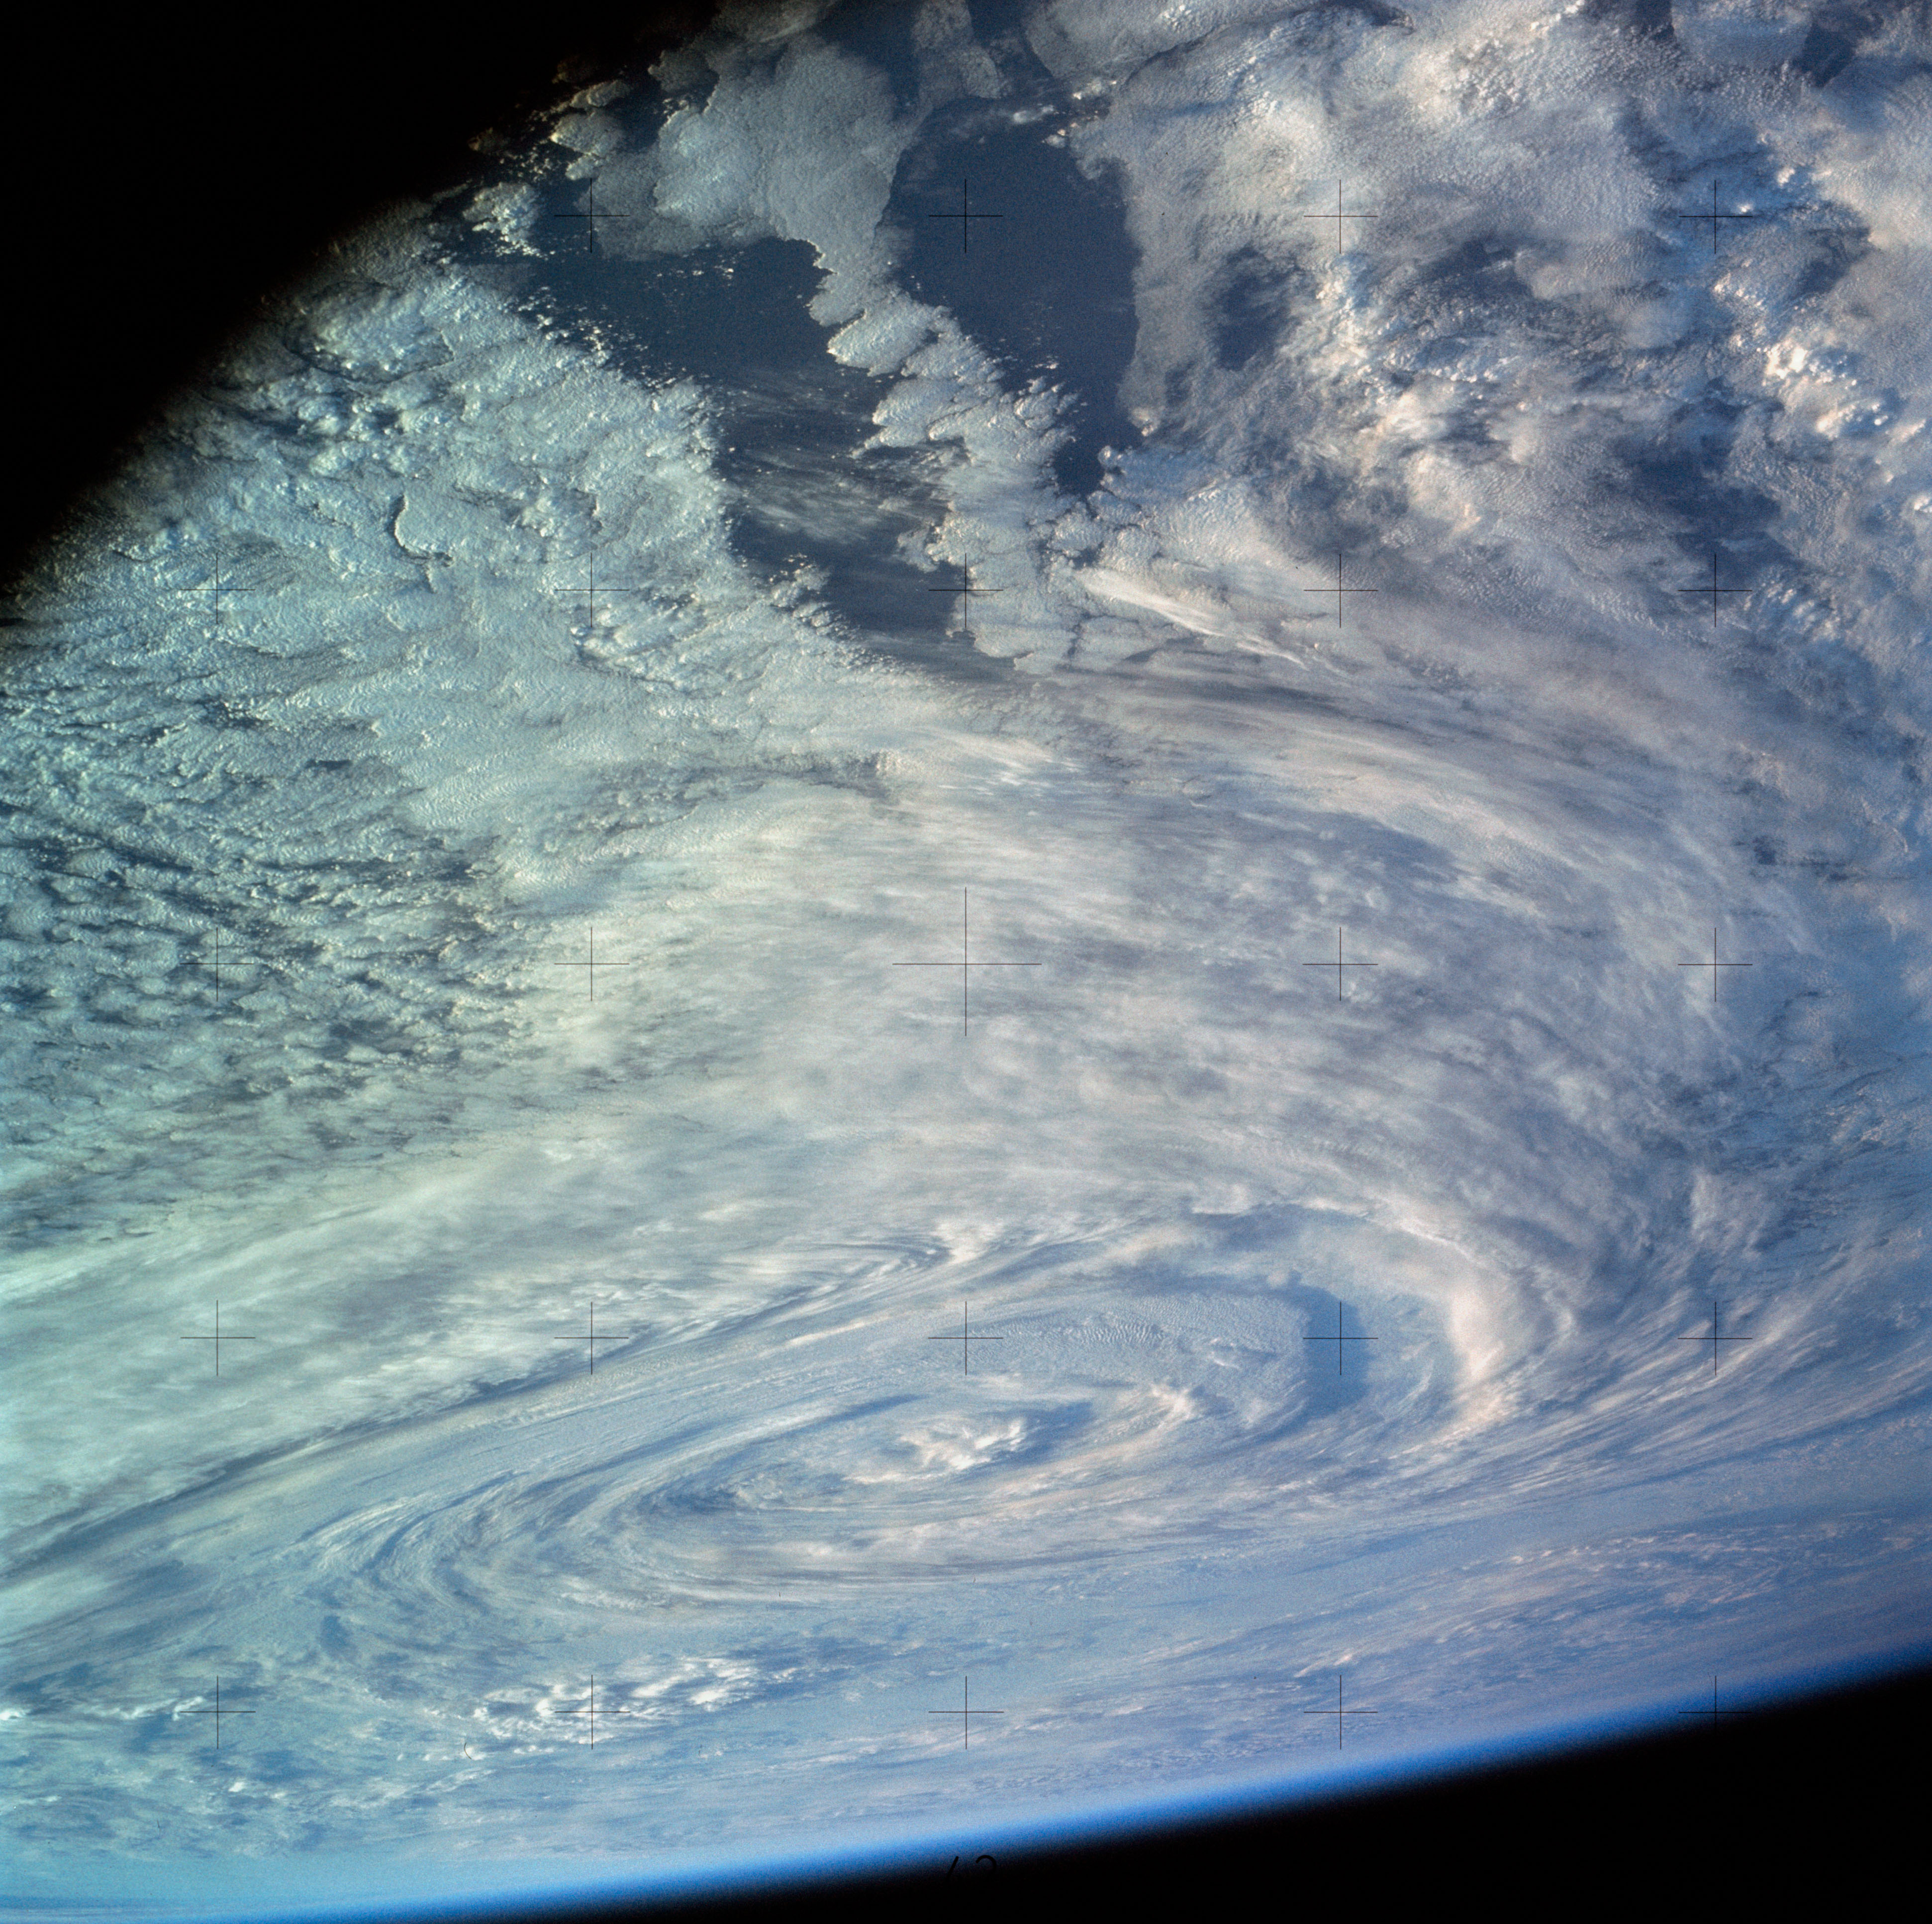 Crew handheld photograph of a cyclone in the South Pacific